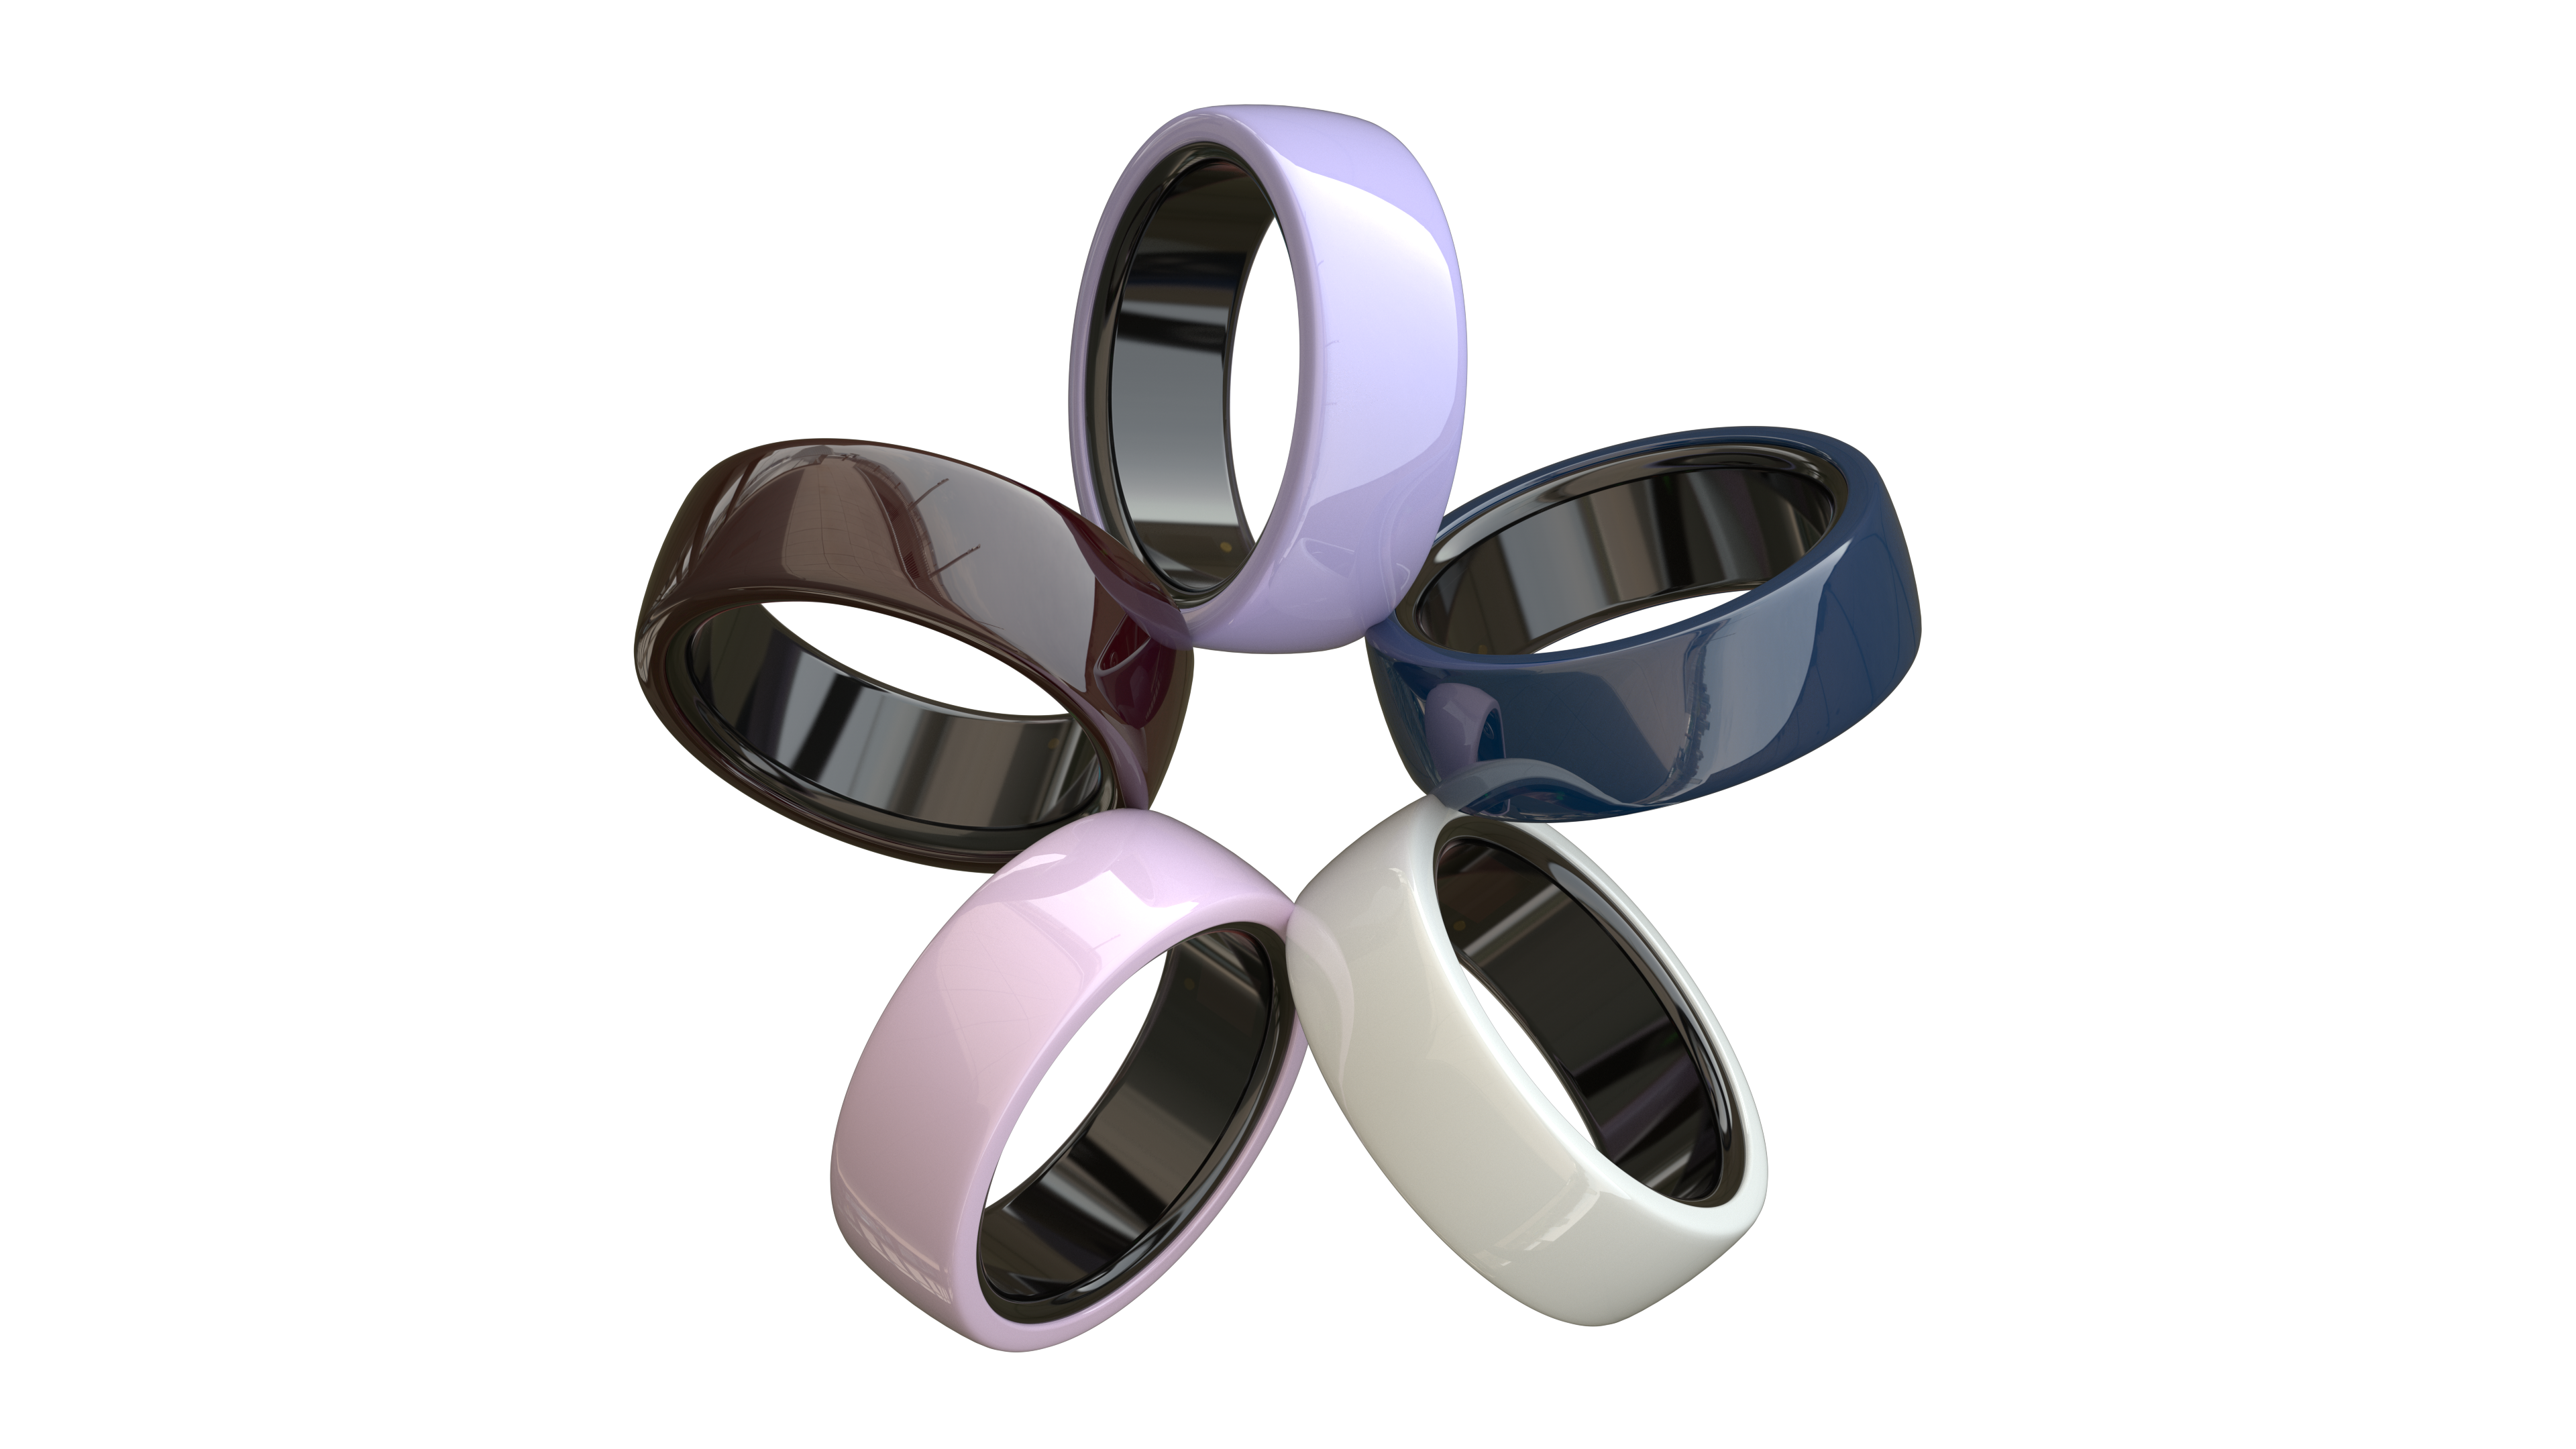 This wearable smart ring detects cab driver's alcohol levels to keep  passengers safe from harm's way - Yanko Design